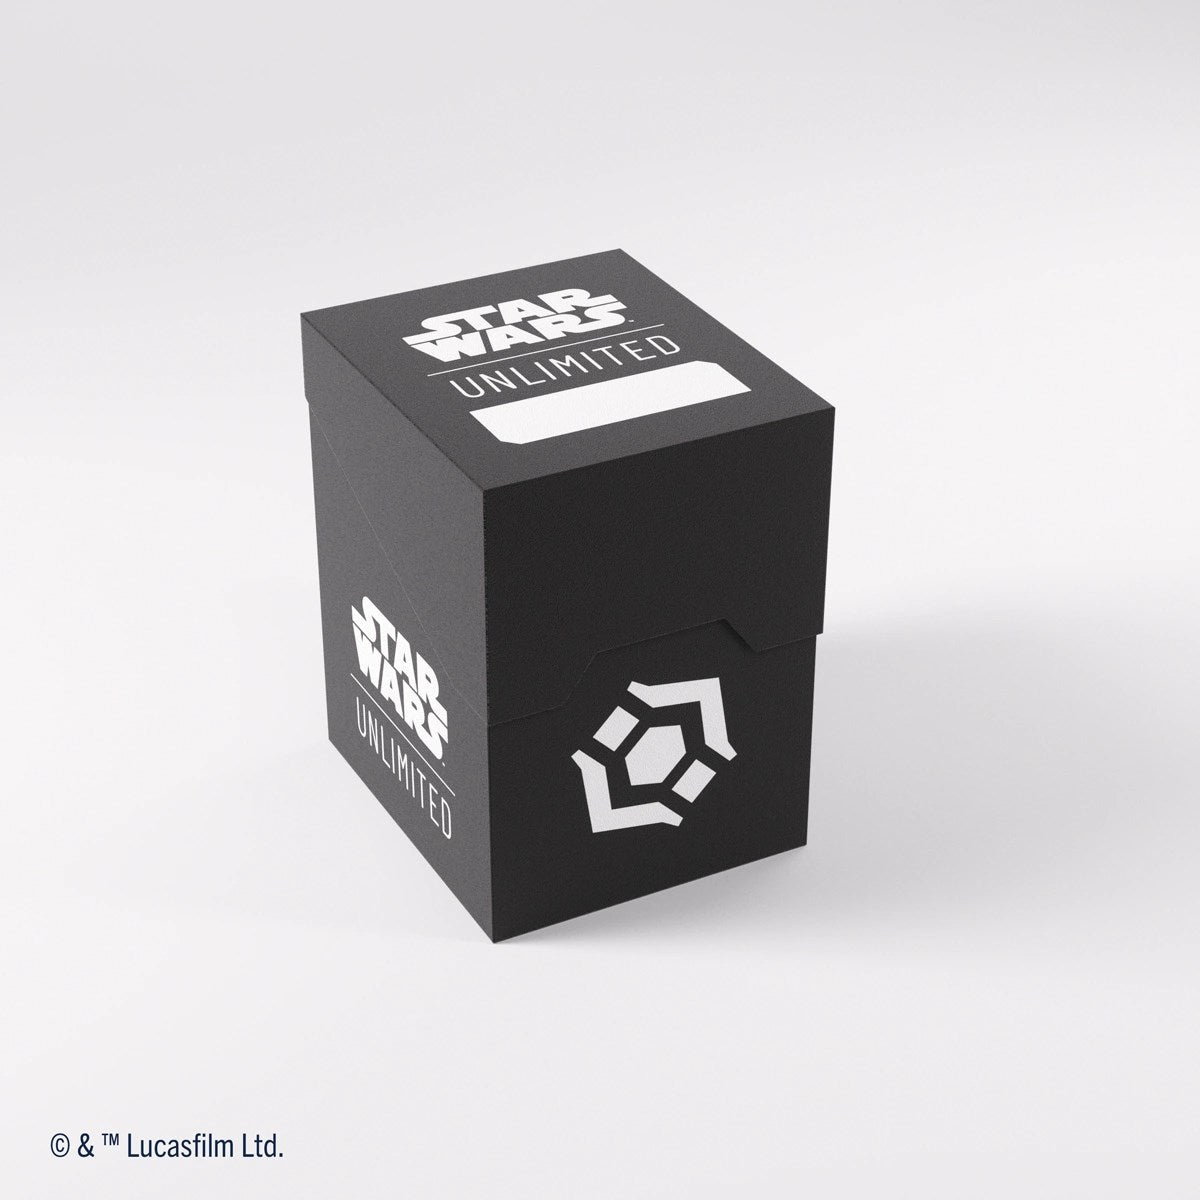 Star Wars: Unlimited Soft Crate - (Black/White)